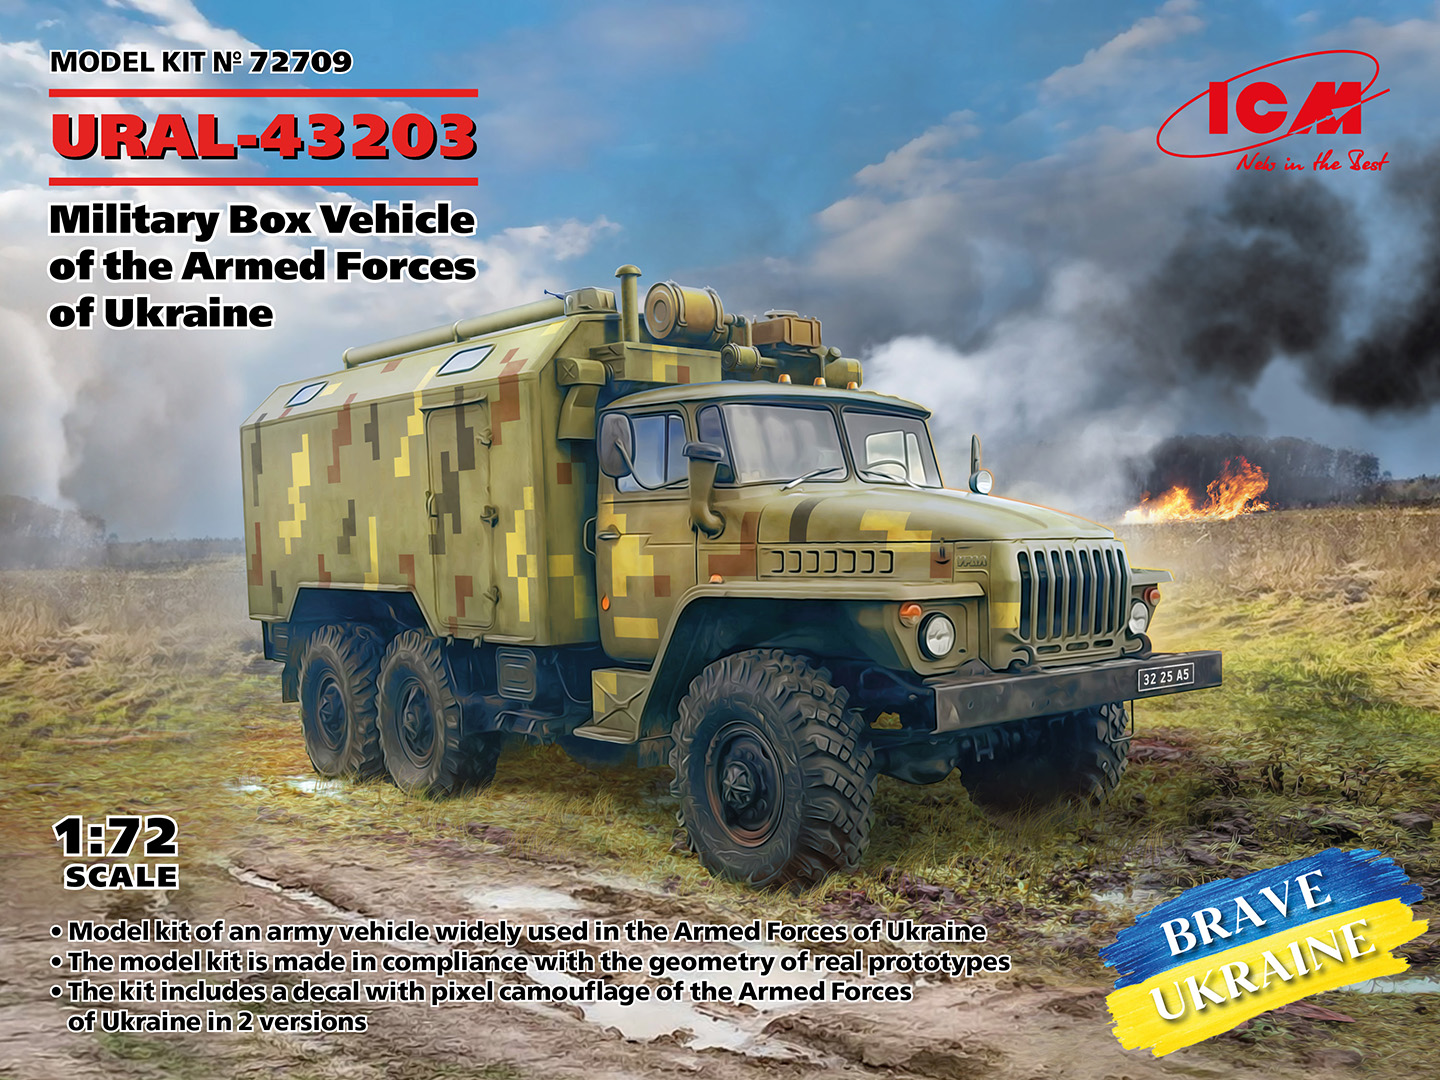 1/72 URAL-43203, Military Box Vehicle of the Armed Forces of Ukraine